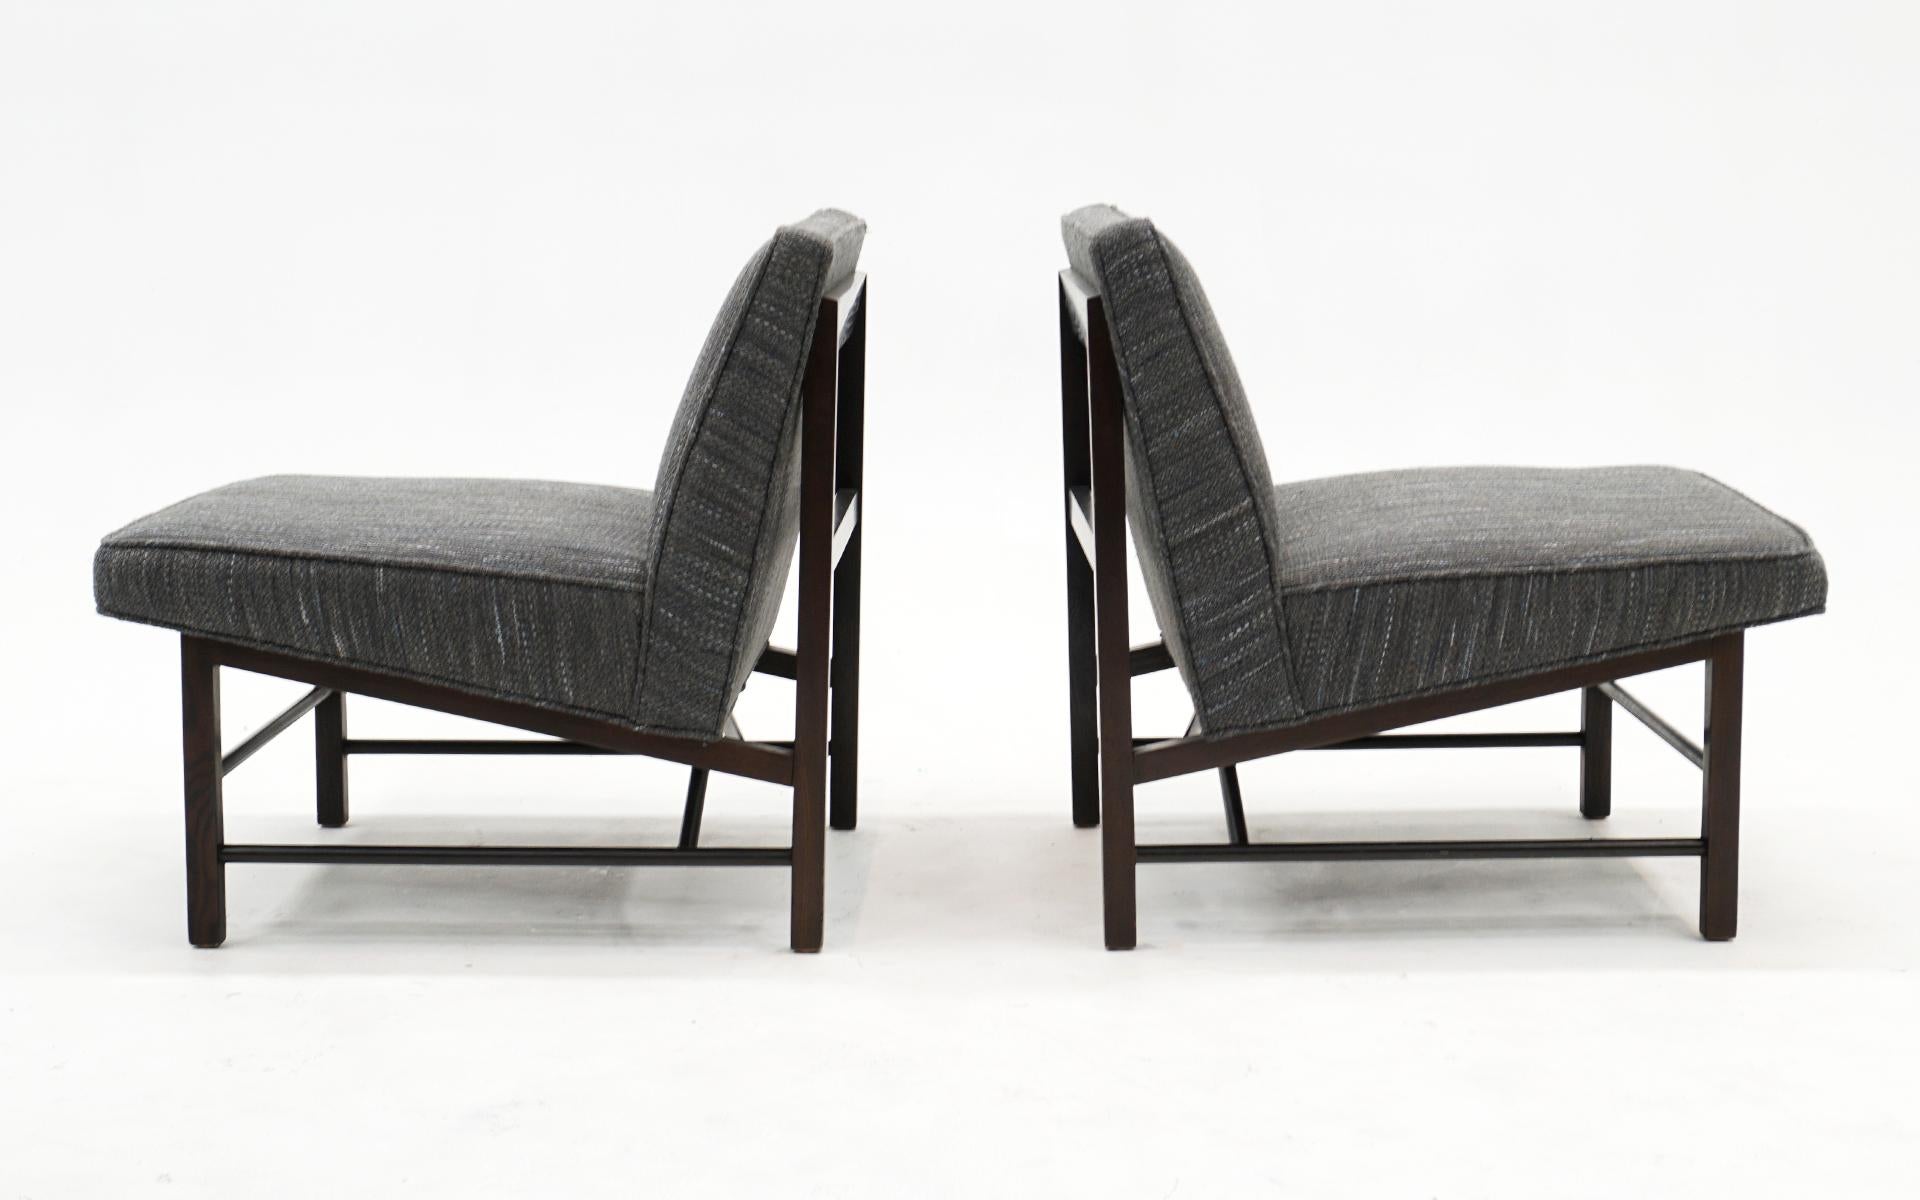 Pair Slipper Chairs by Edward Wormley for Dunbar, New Charcoal Gray Upholstery In Good Condition For Sale In Kansas City, MO